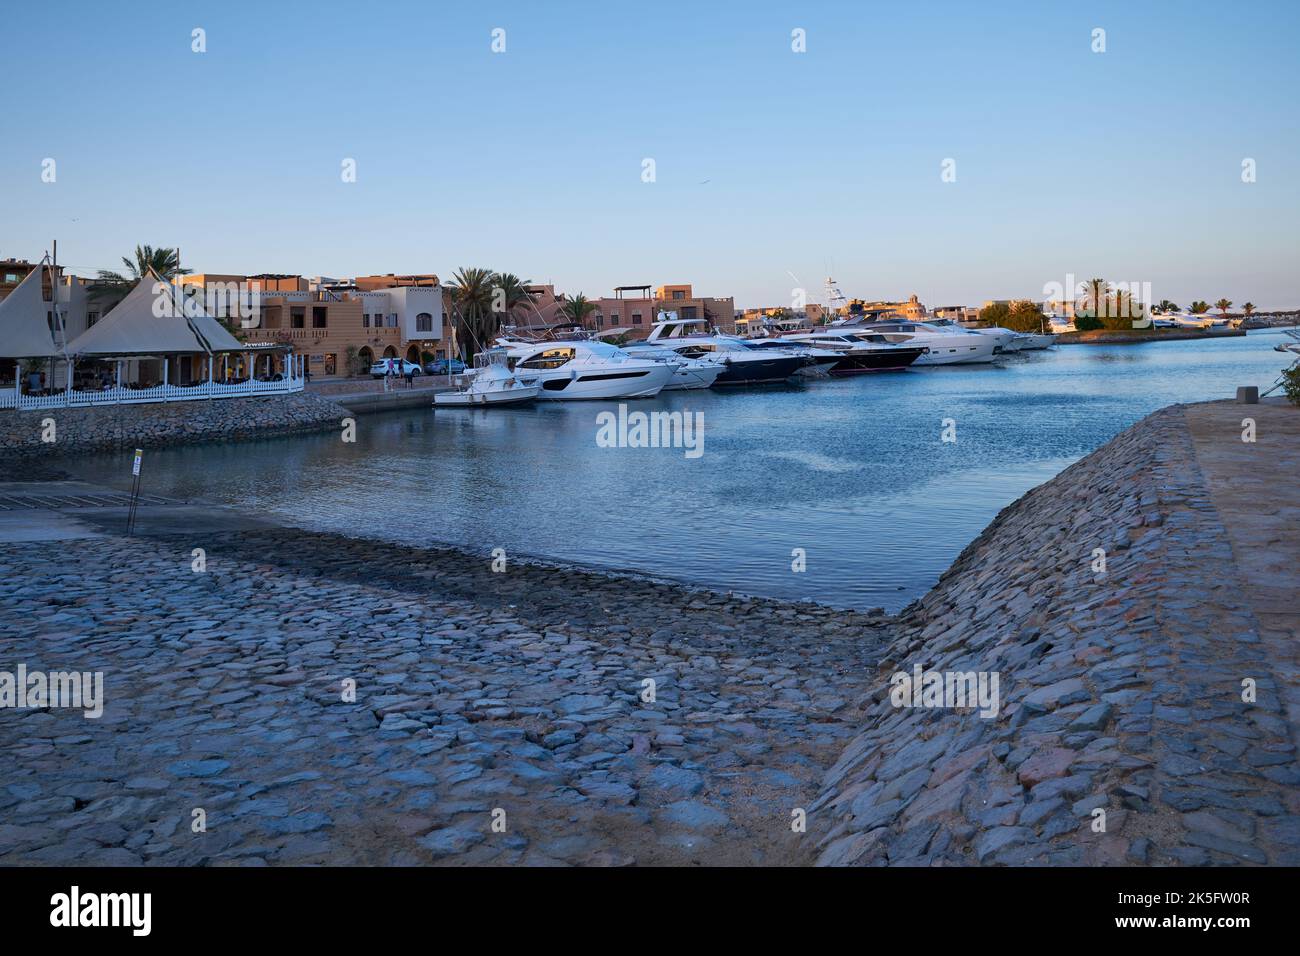 Abu Tig Marina in El Gouna, Hurghada, Red Sea Governorate, Egypt sunset view showing luxury yachts. Stock Photo